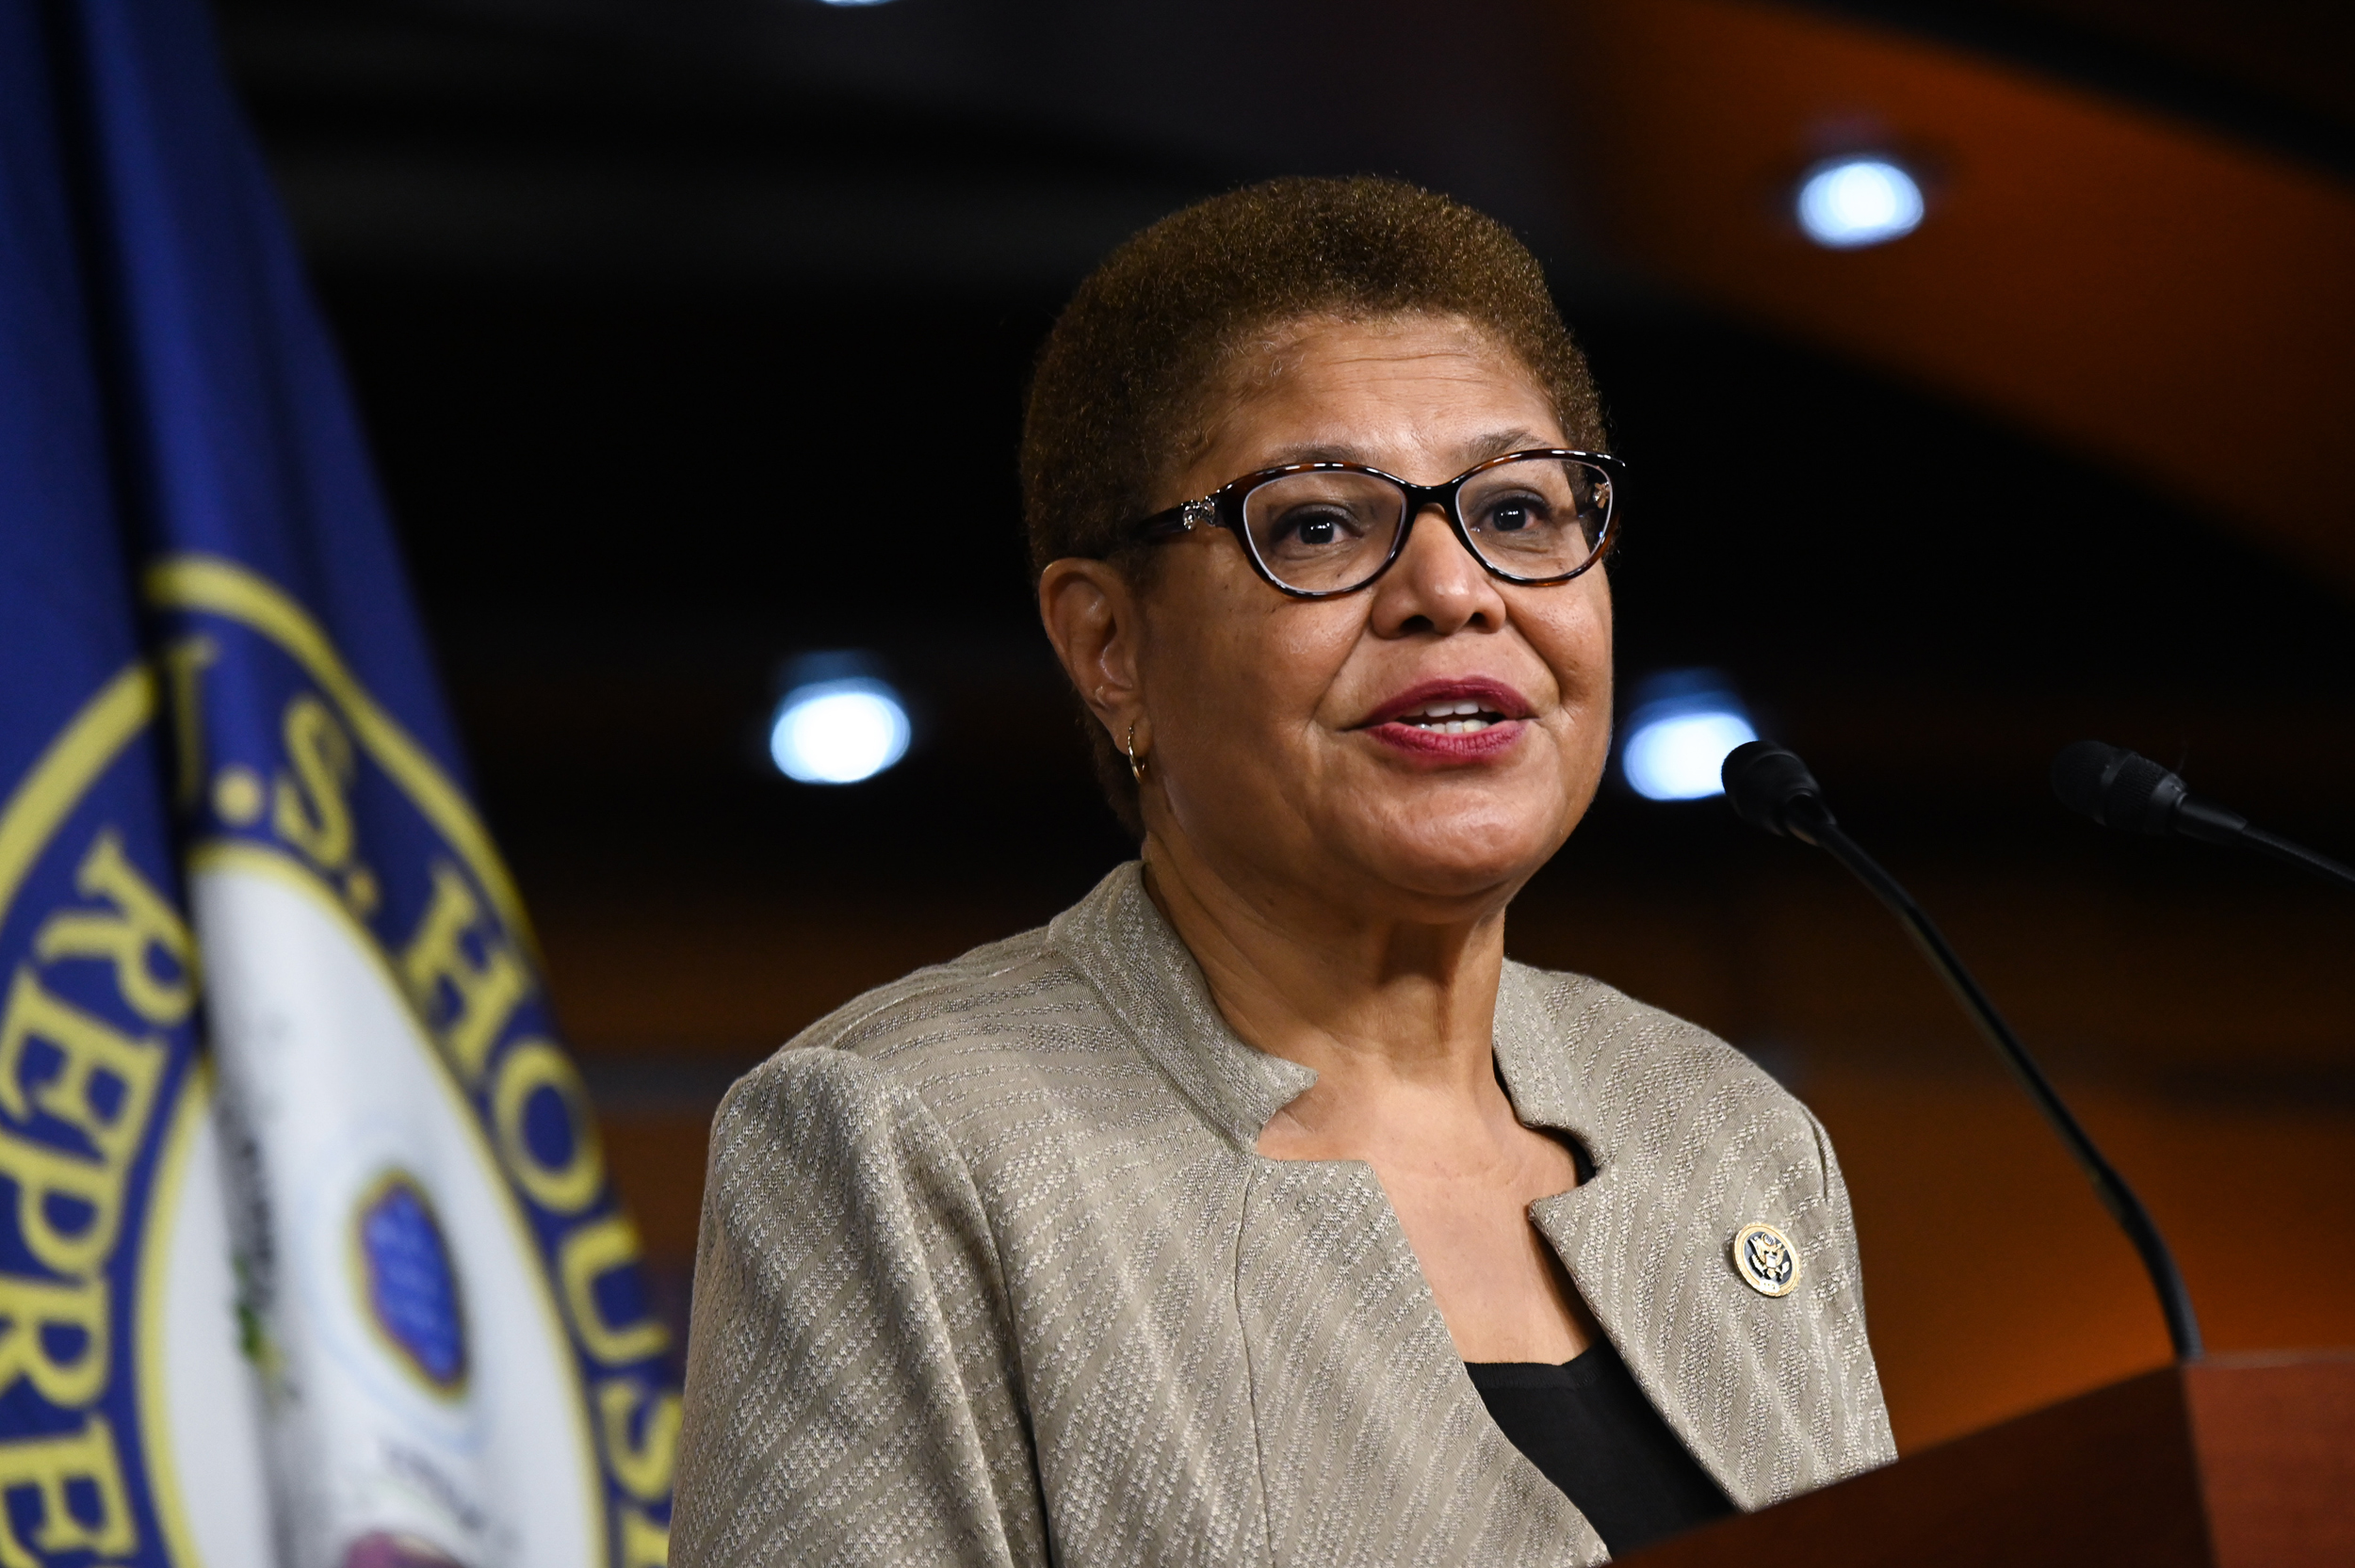 Representative Karen Bass speaks during a news conference on Capitol Hill on July 1, 2020. Photo credit Erin Scott/Bloomberg via Getty Images